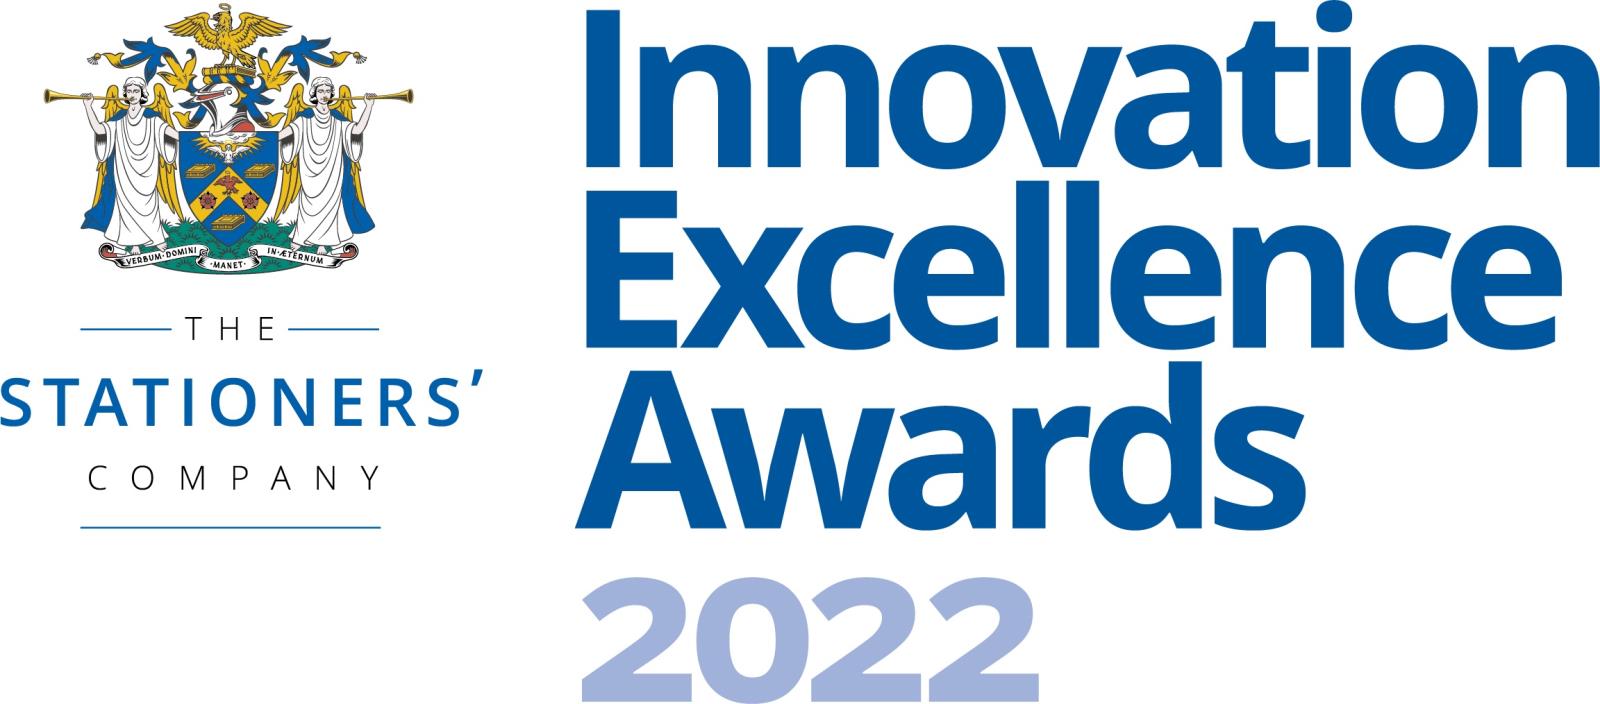 Innovation Excellence Awards Lunch 2022